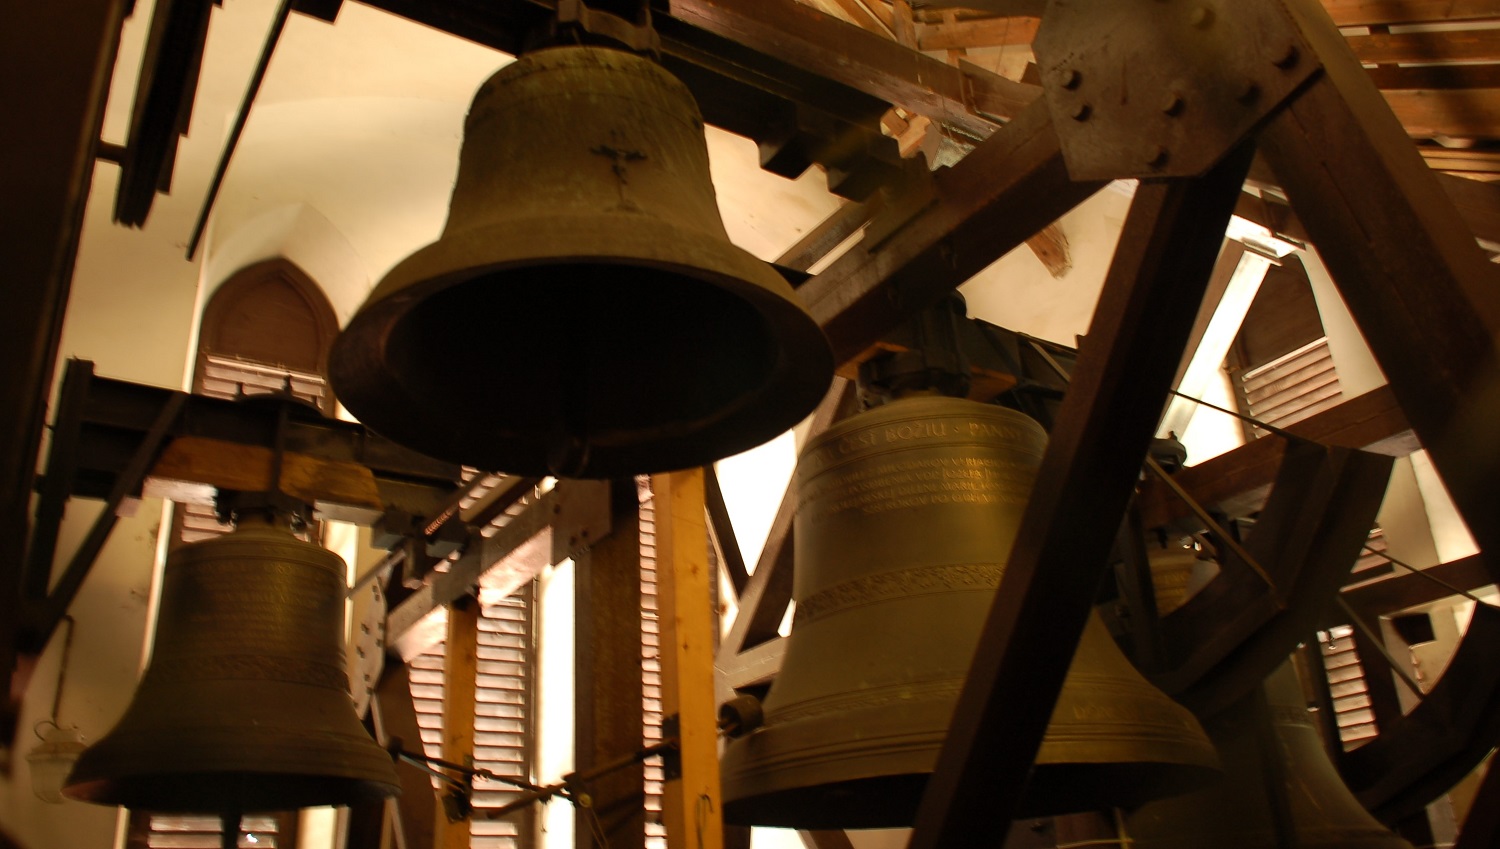 4,000 Years of Ringing - Electronic church bells